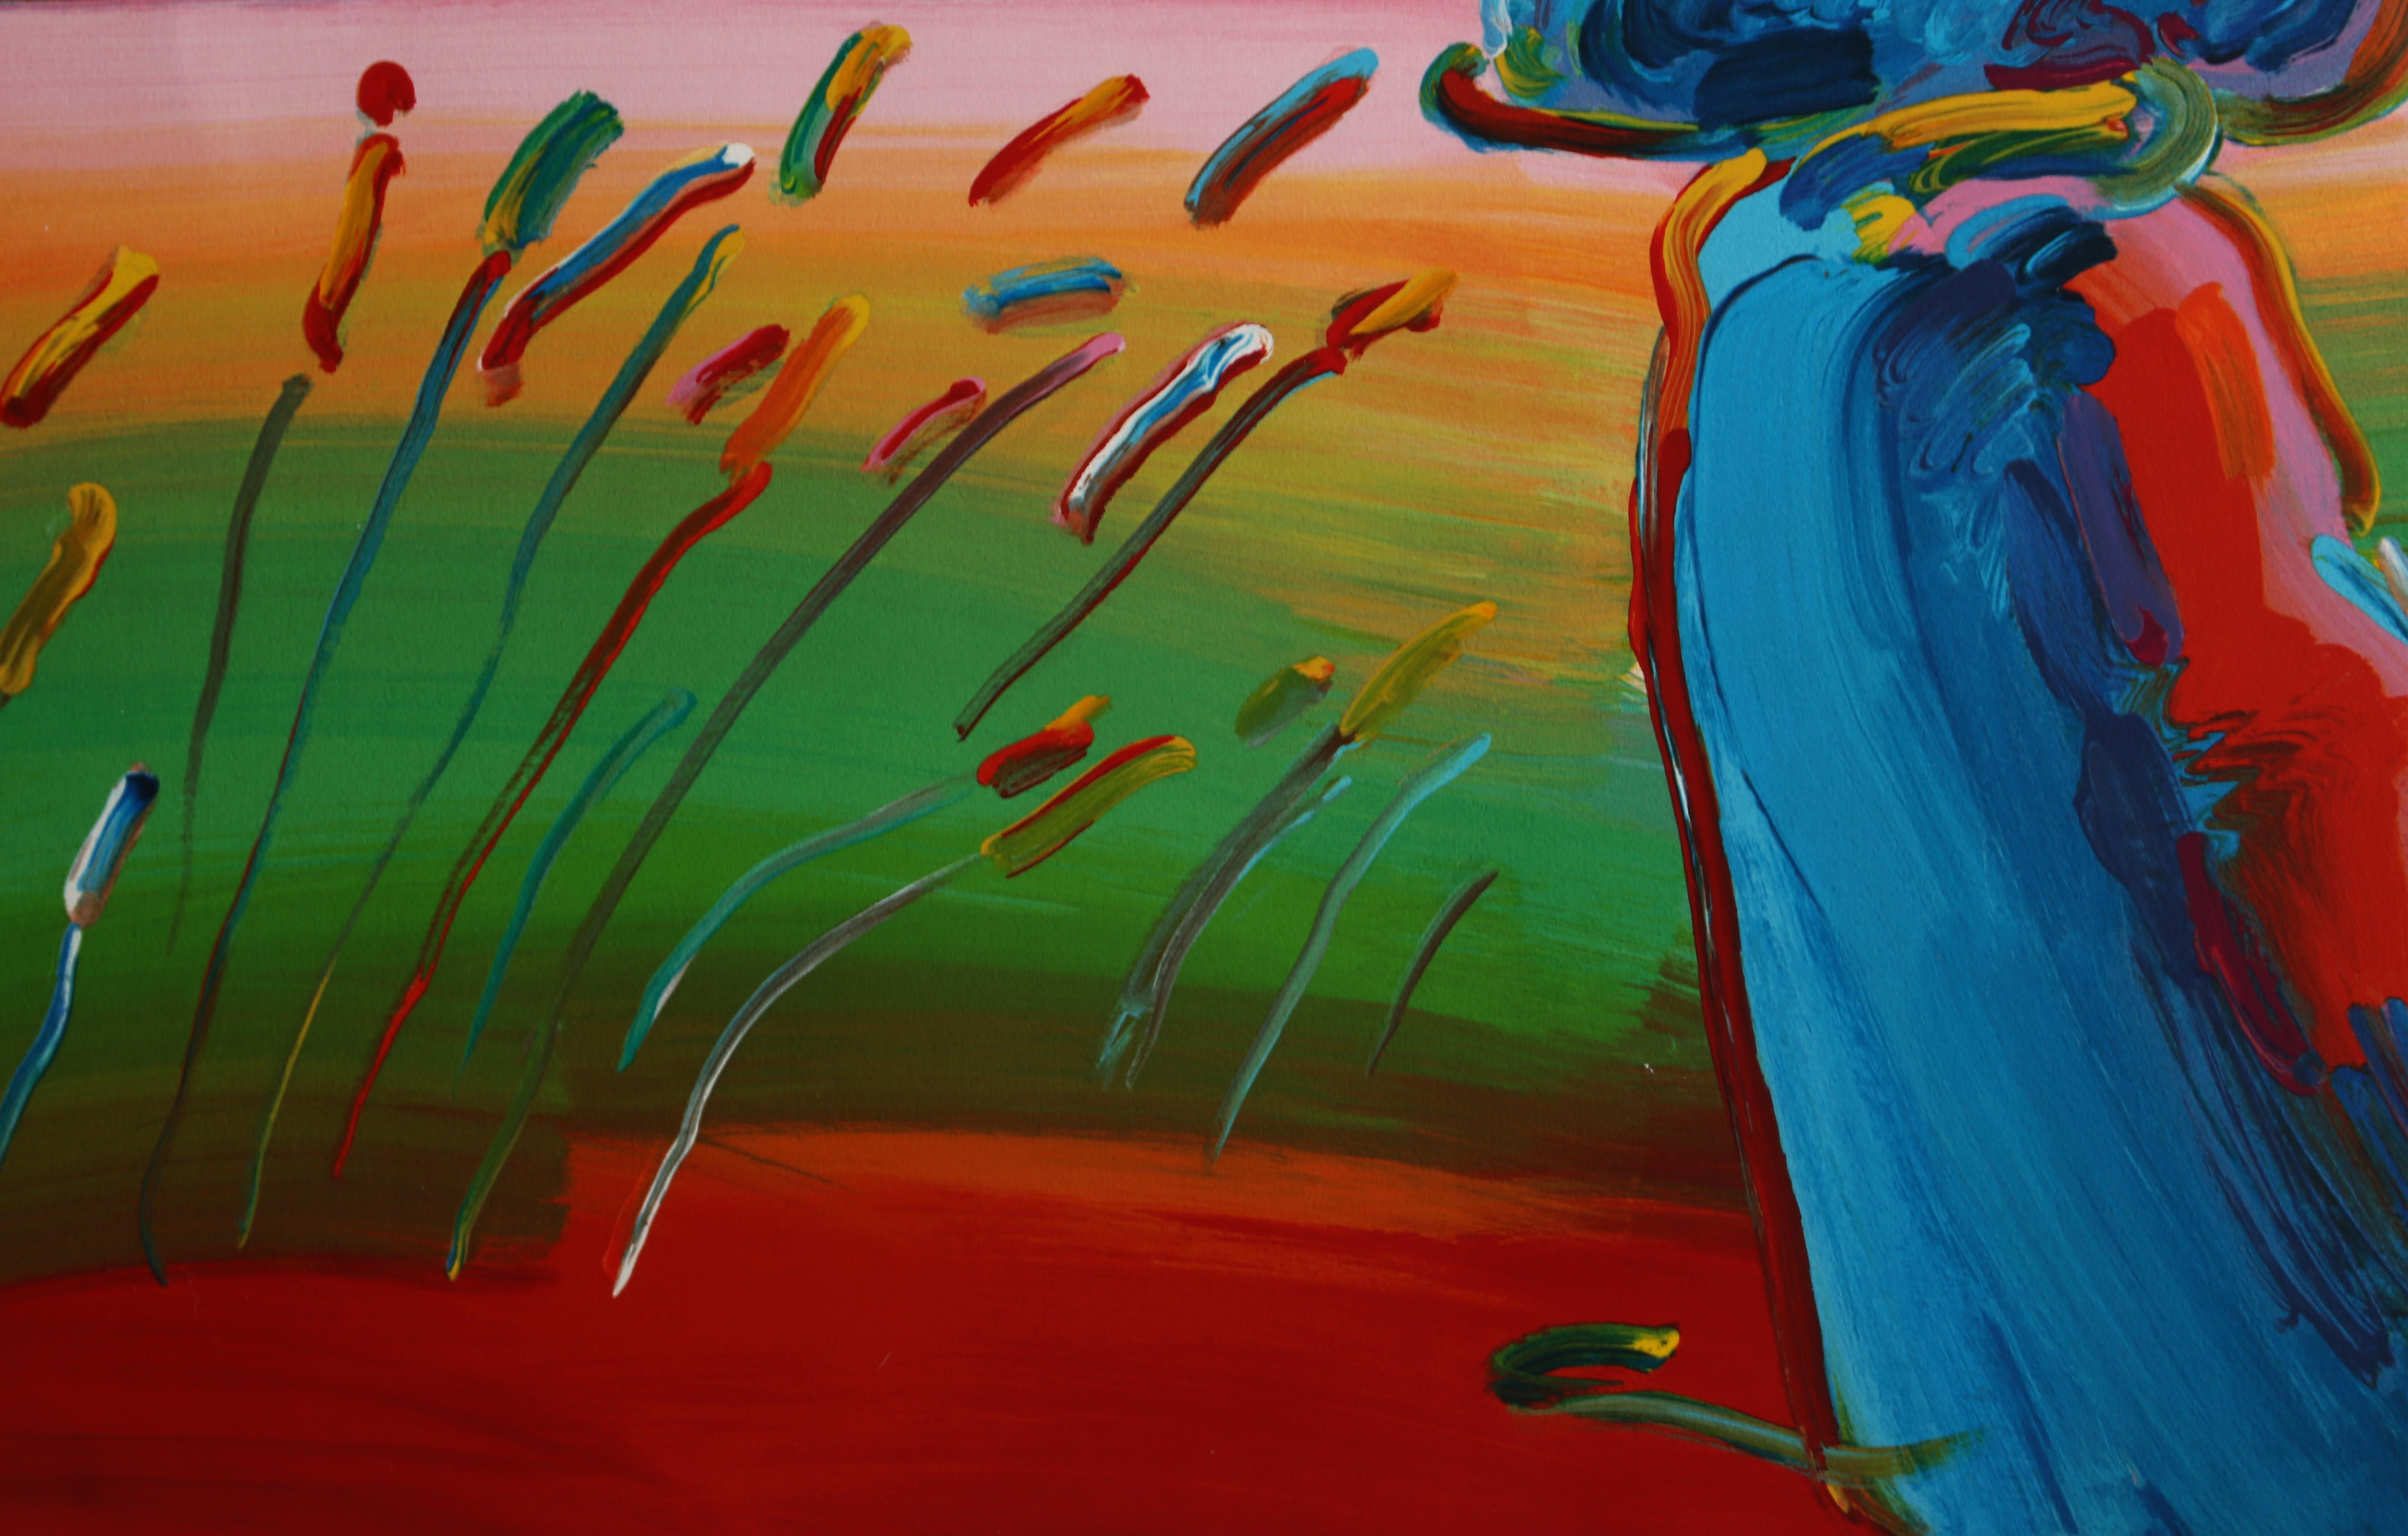 Walking in the Reeds - Beige Figurative Print by Peter Max